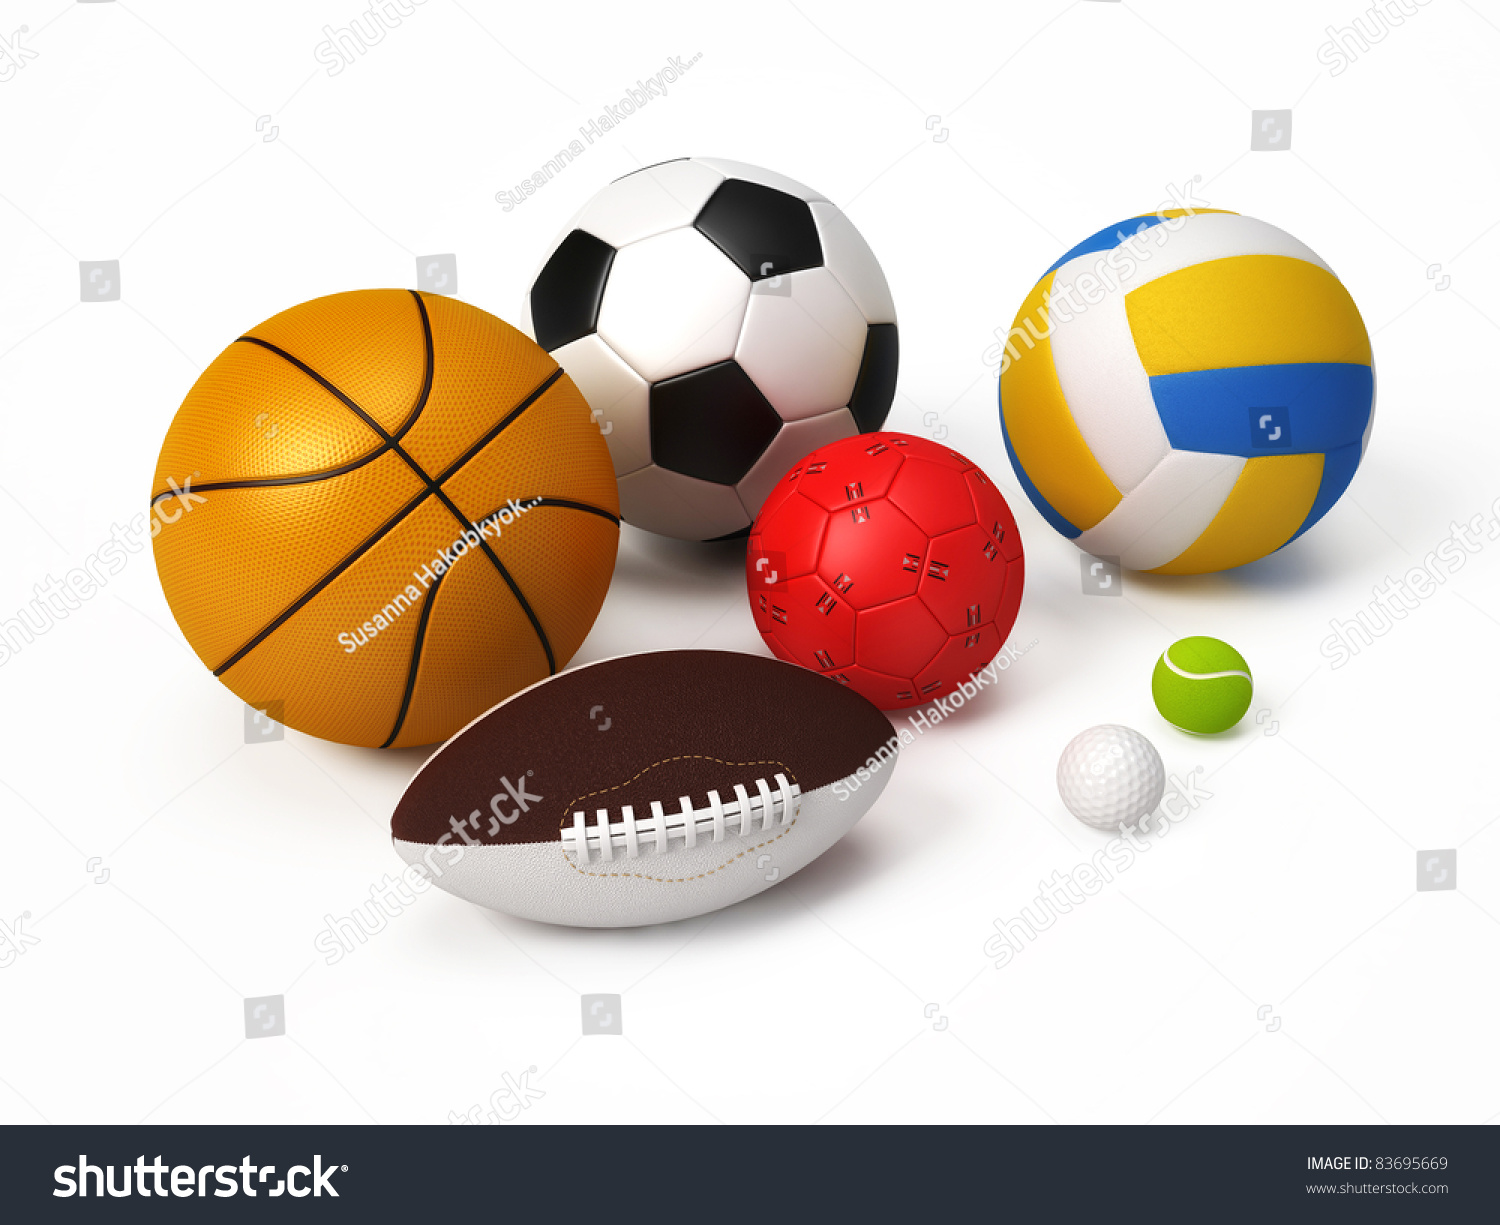 Different Sport Balls Collection Stock Photo 83695669 : Shutterstock